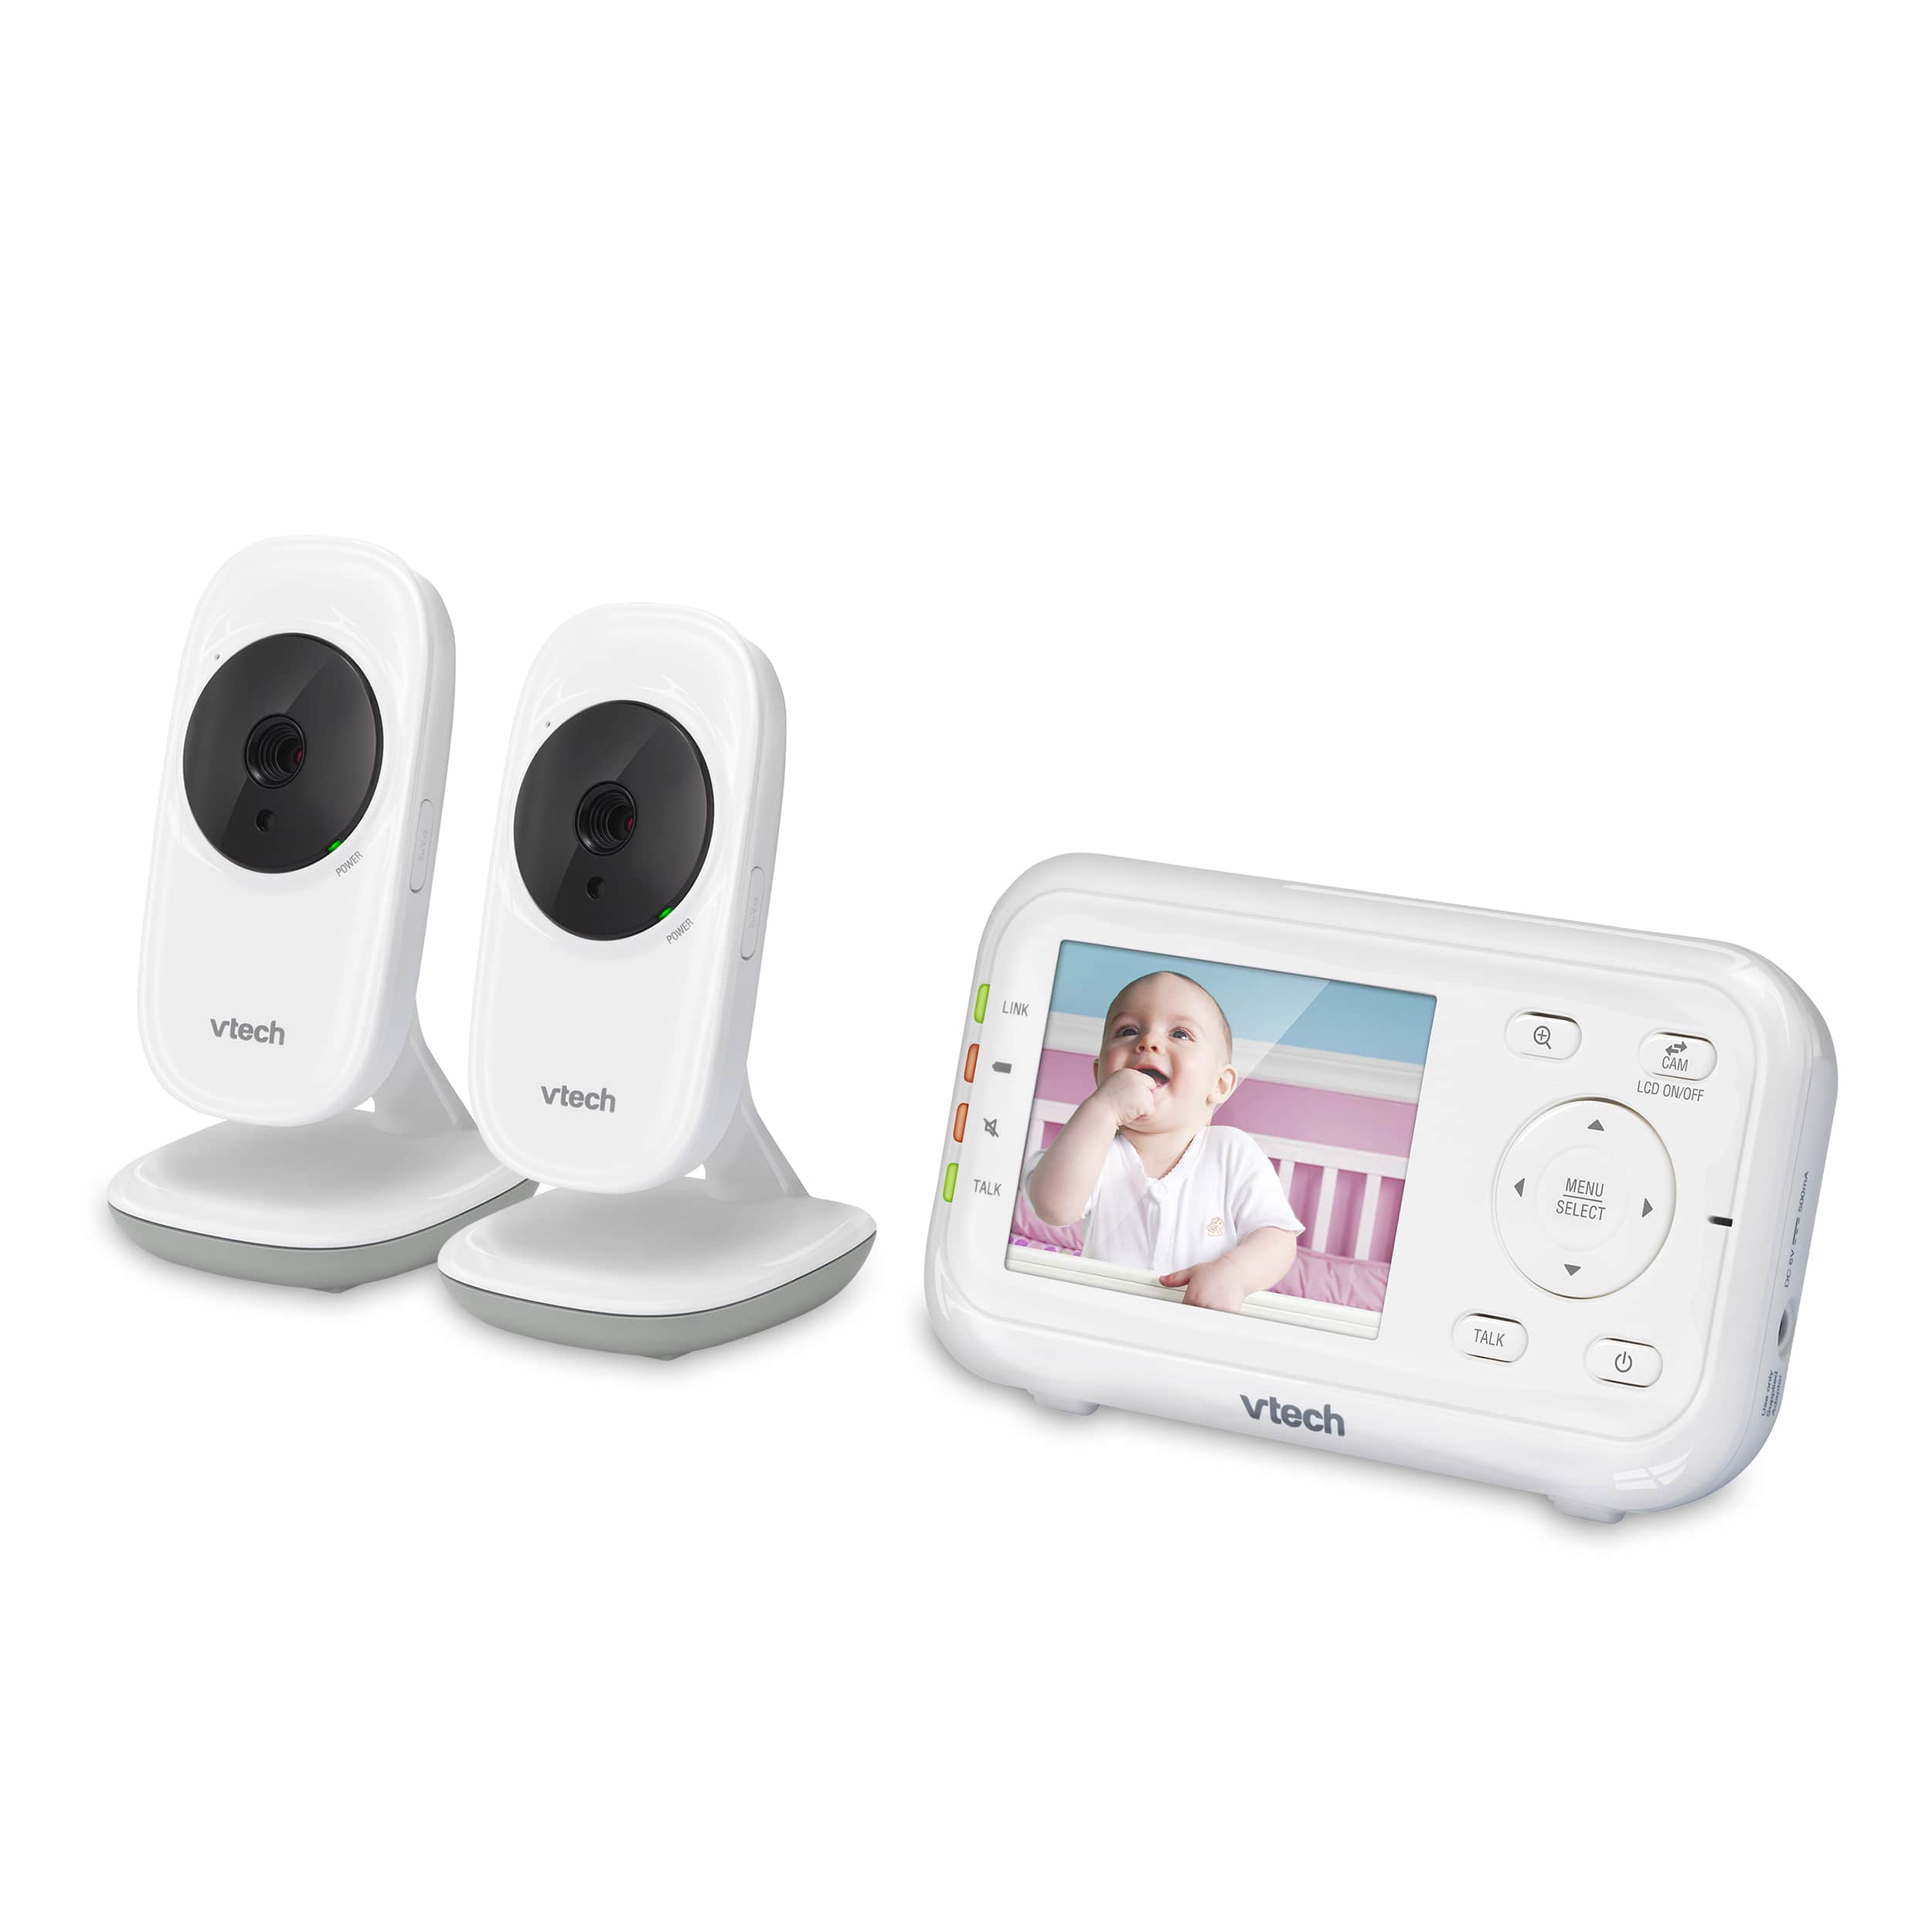 2 8 Digital Video Baby Monitor With 2 Cameras And Automatic Night Vision Vm3252 2 Vtech Cordless Phones